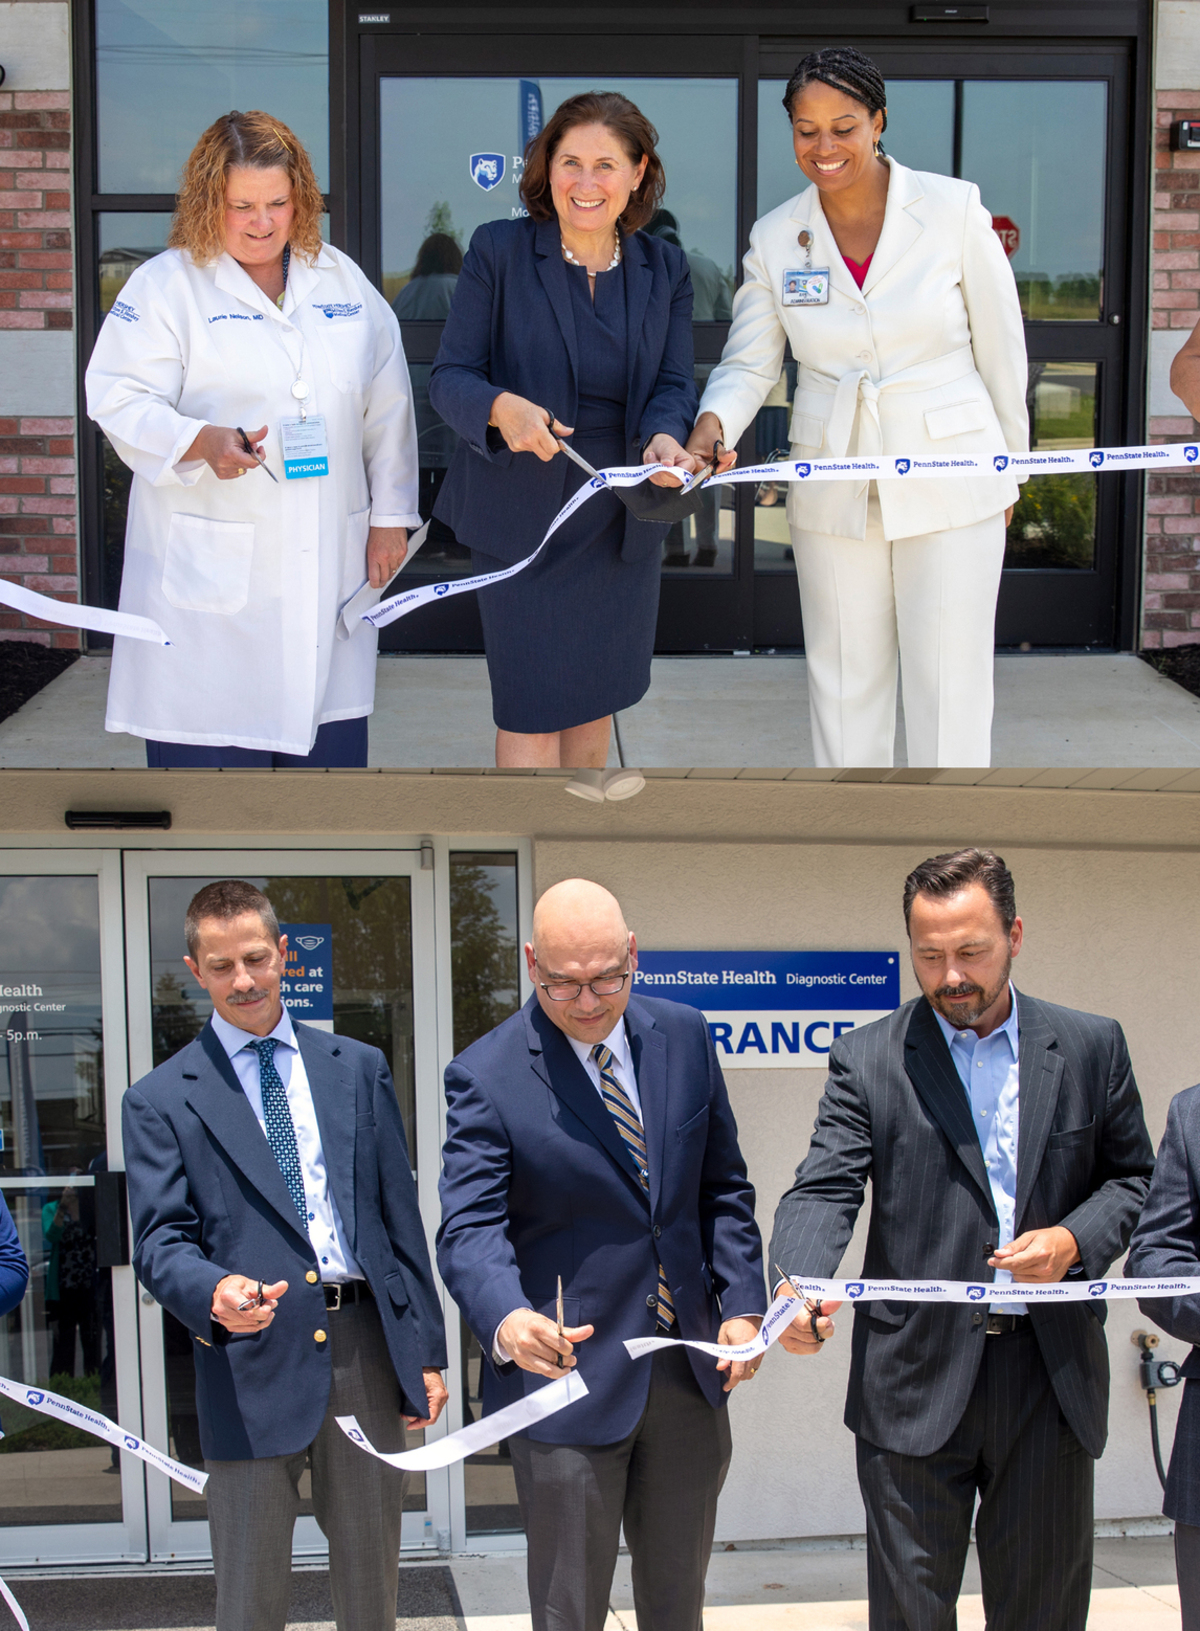 Staff cut ribbons at two new Penn State Health Medical Group locations.